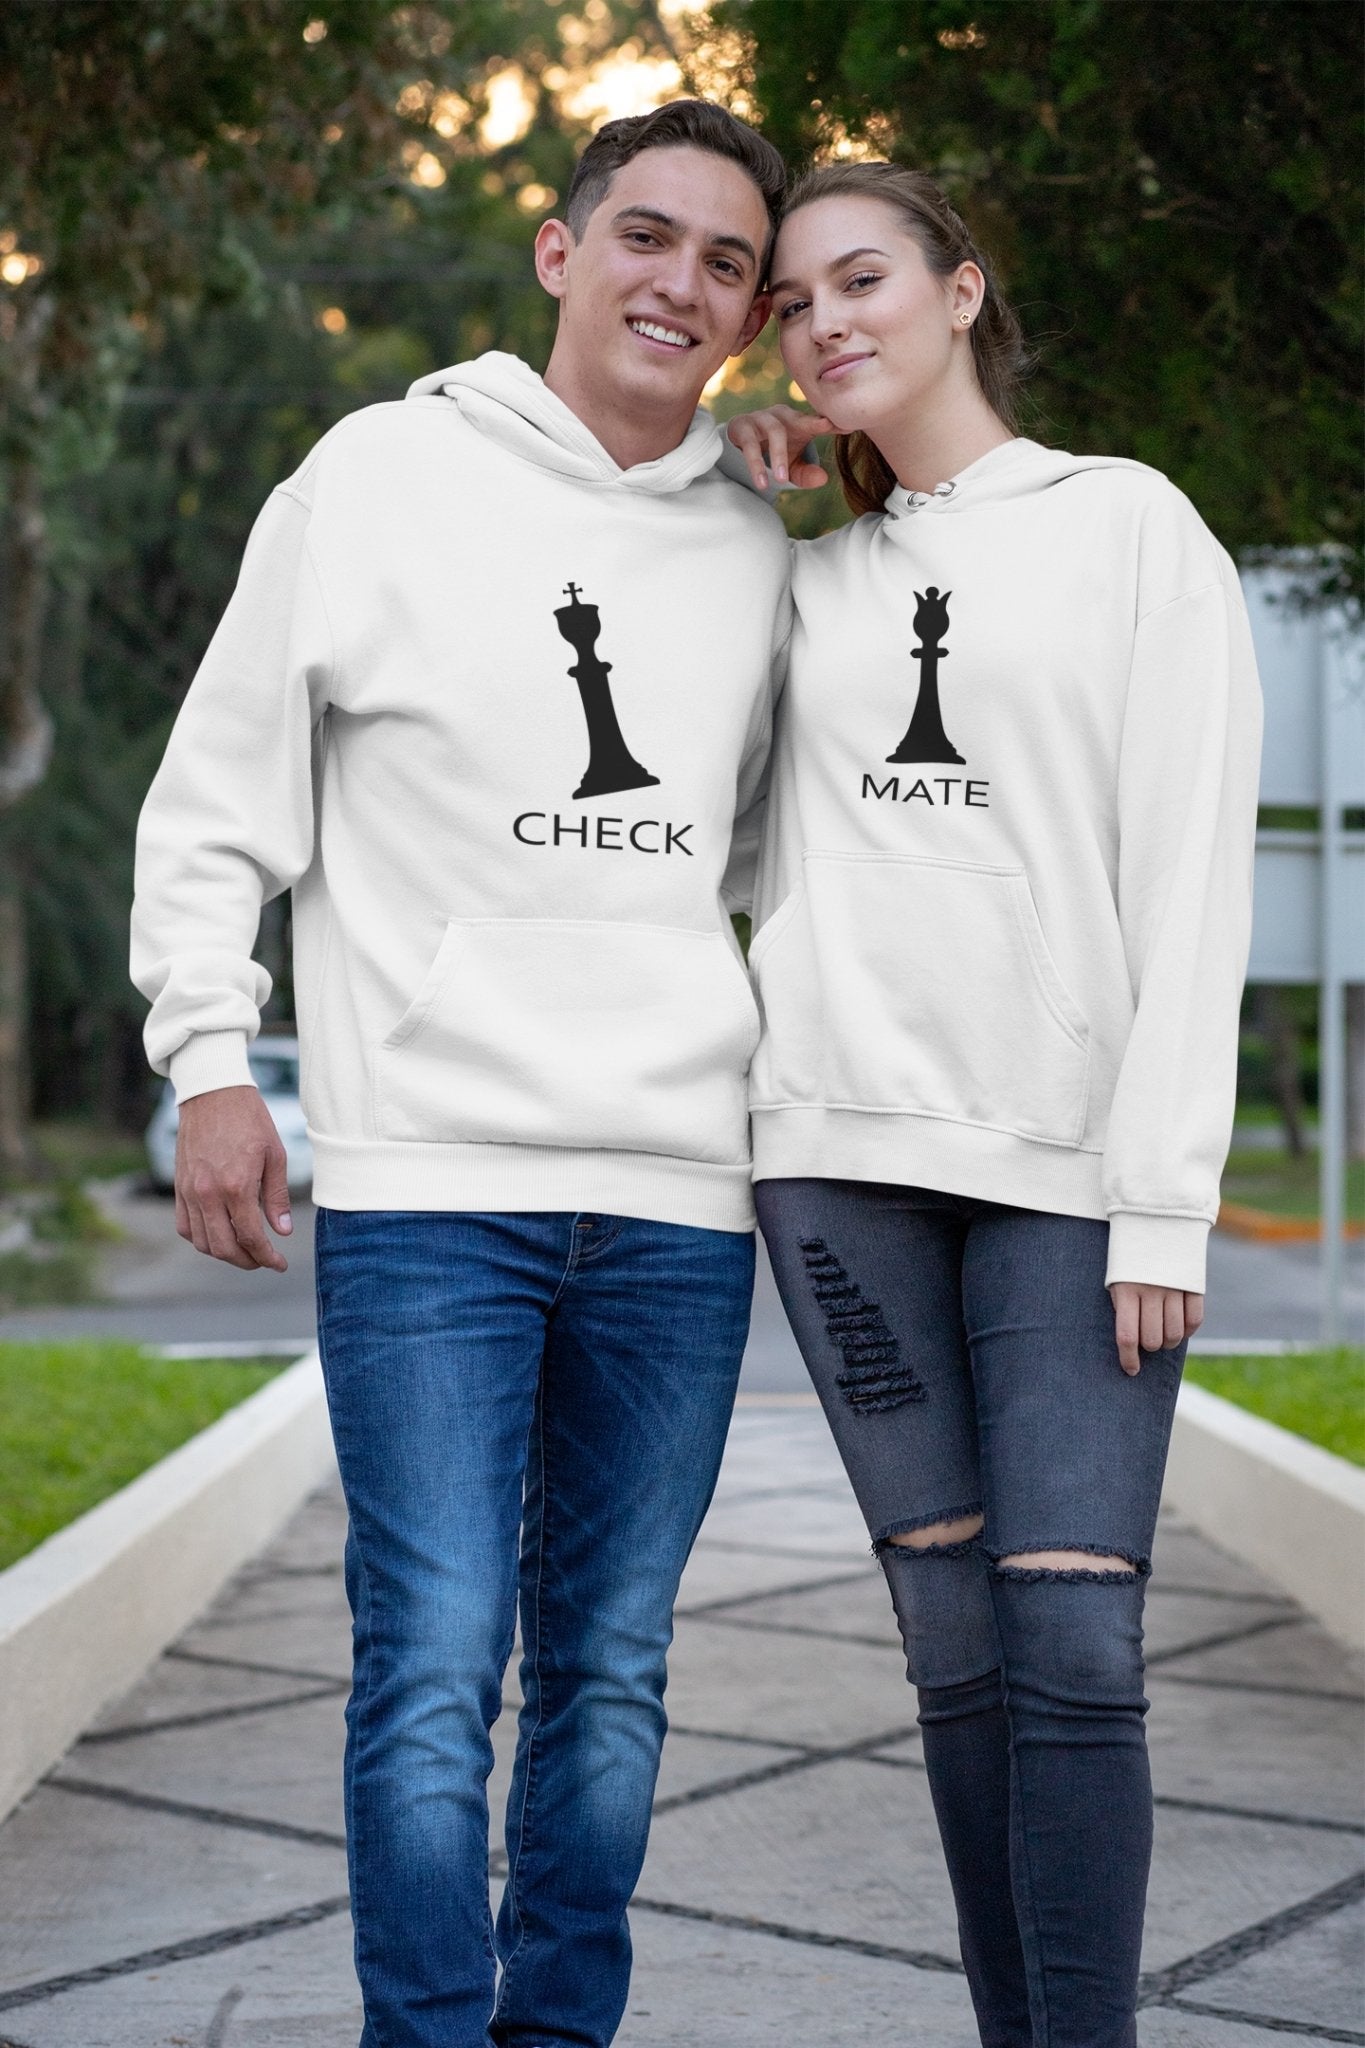 Check Mate Couple Hoodie-FunkyTradition - FunkyTradition